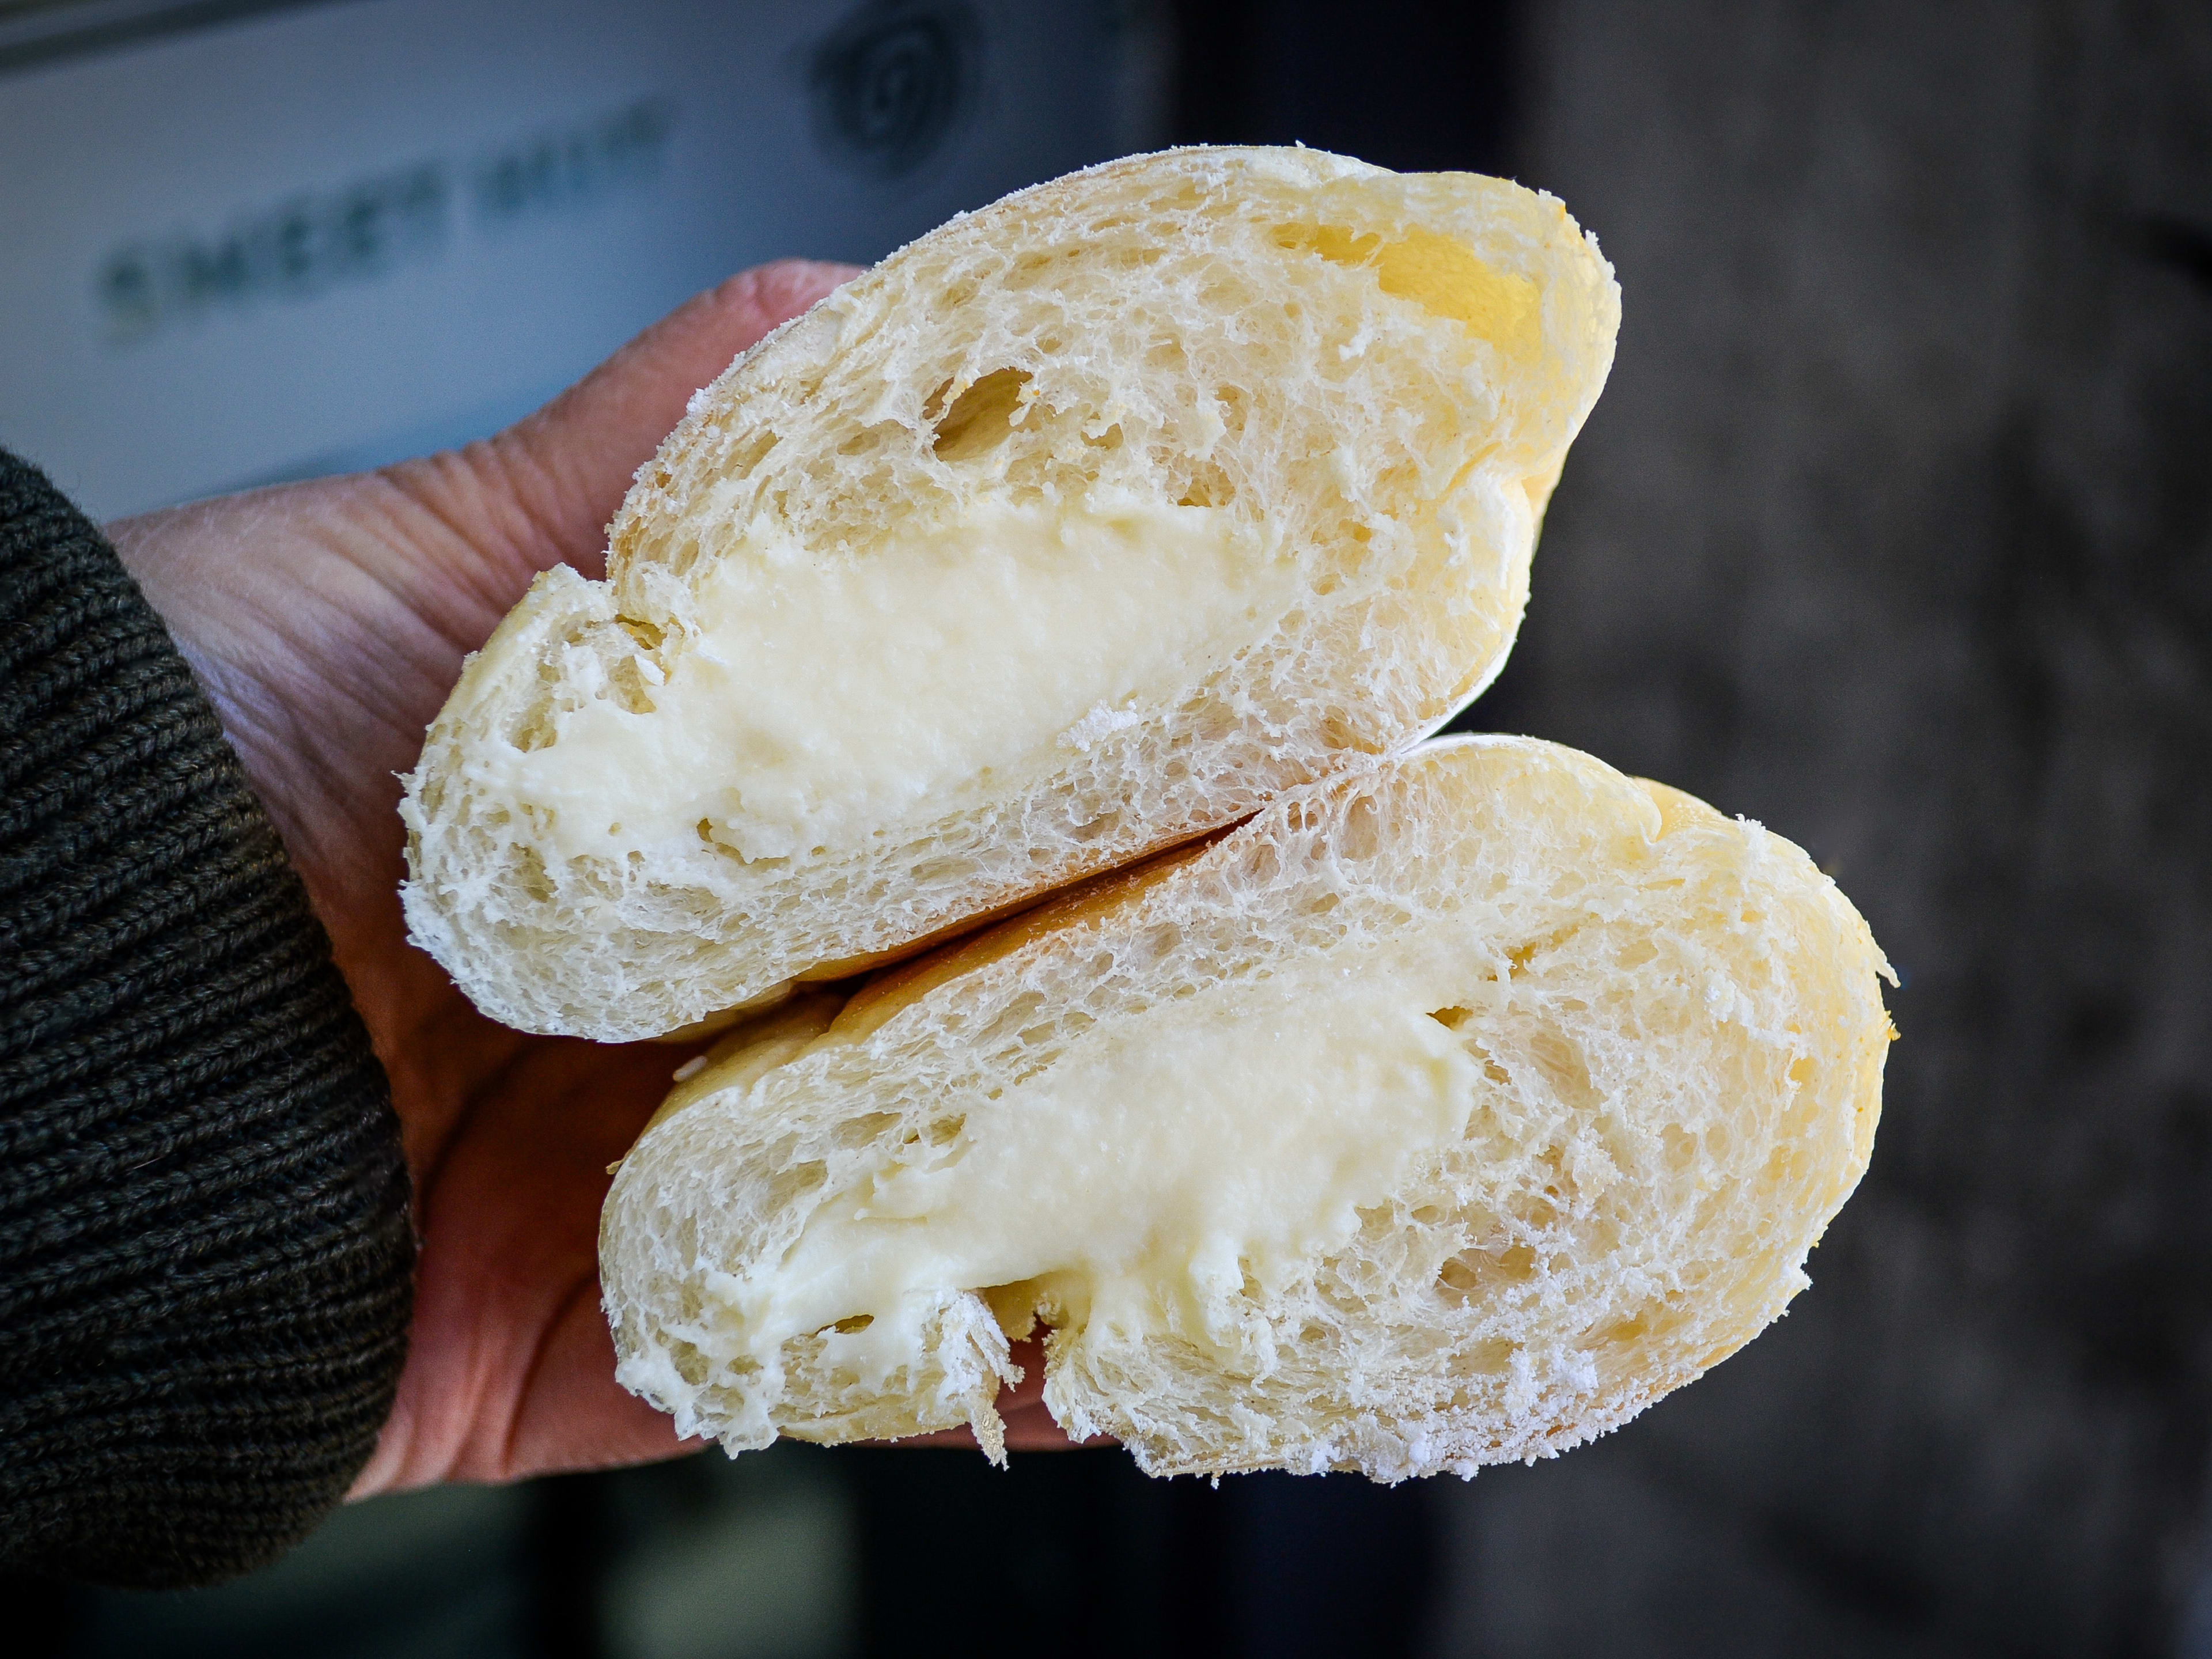 Bread bun filled with pastry cream, cut in half to show filling